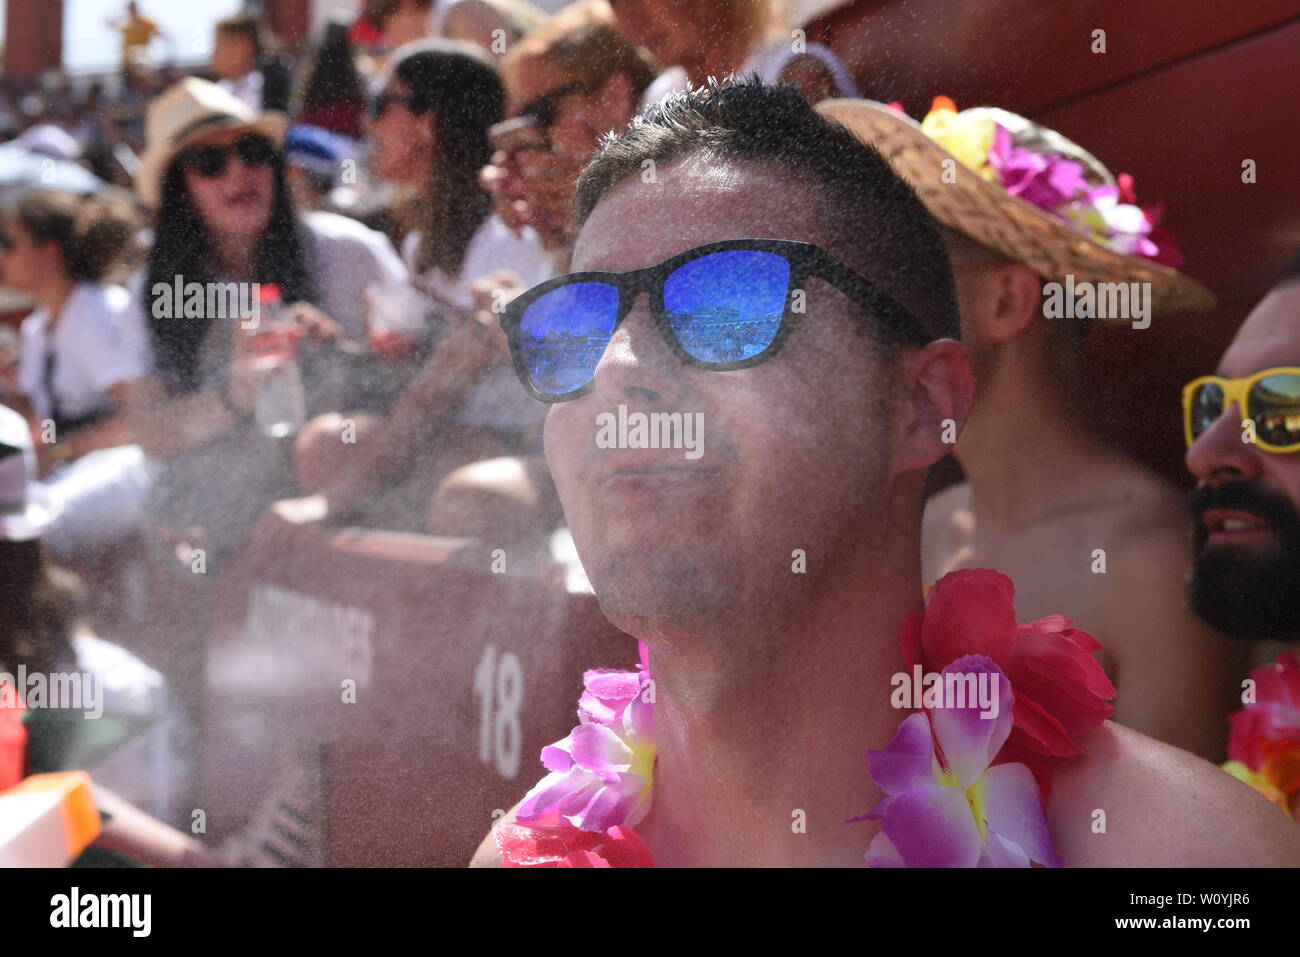 A man cools off with water as temperatures reached 36º degrees Celsius during the Viernes de Toros Celebration in Soria.The first heat wave of summer, which has claimed lives continues in Spain. Spanish's weather agency AEMET forecasts show today is set to be the worst day for severe hot weather with temperatures up to 42C in several regions. Stock Photo